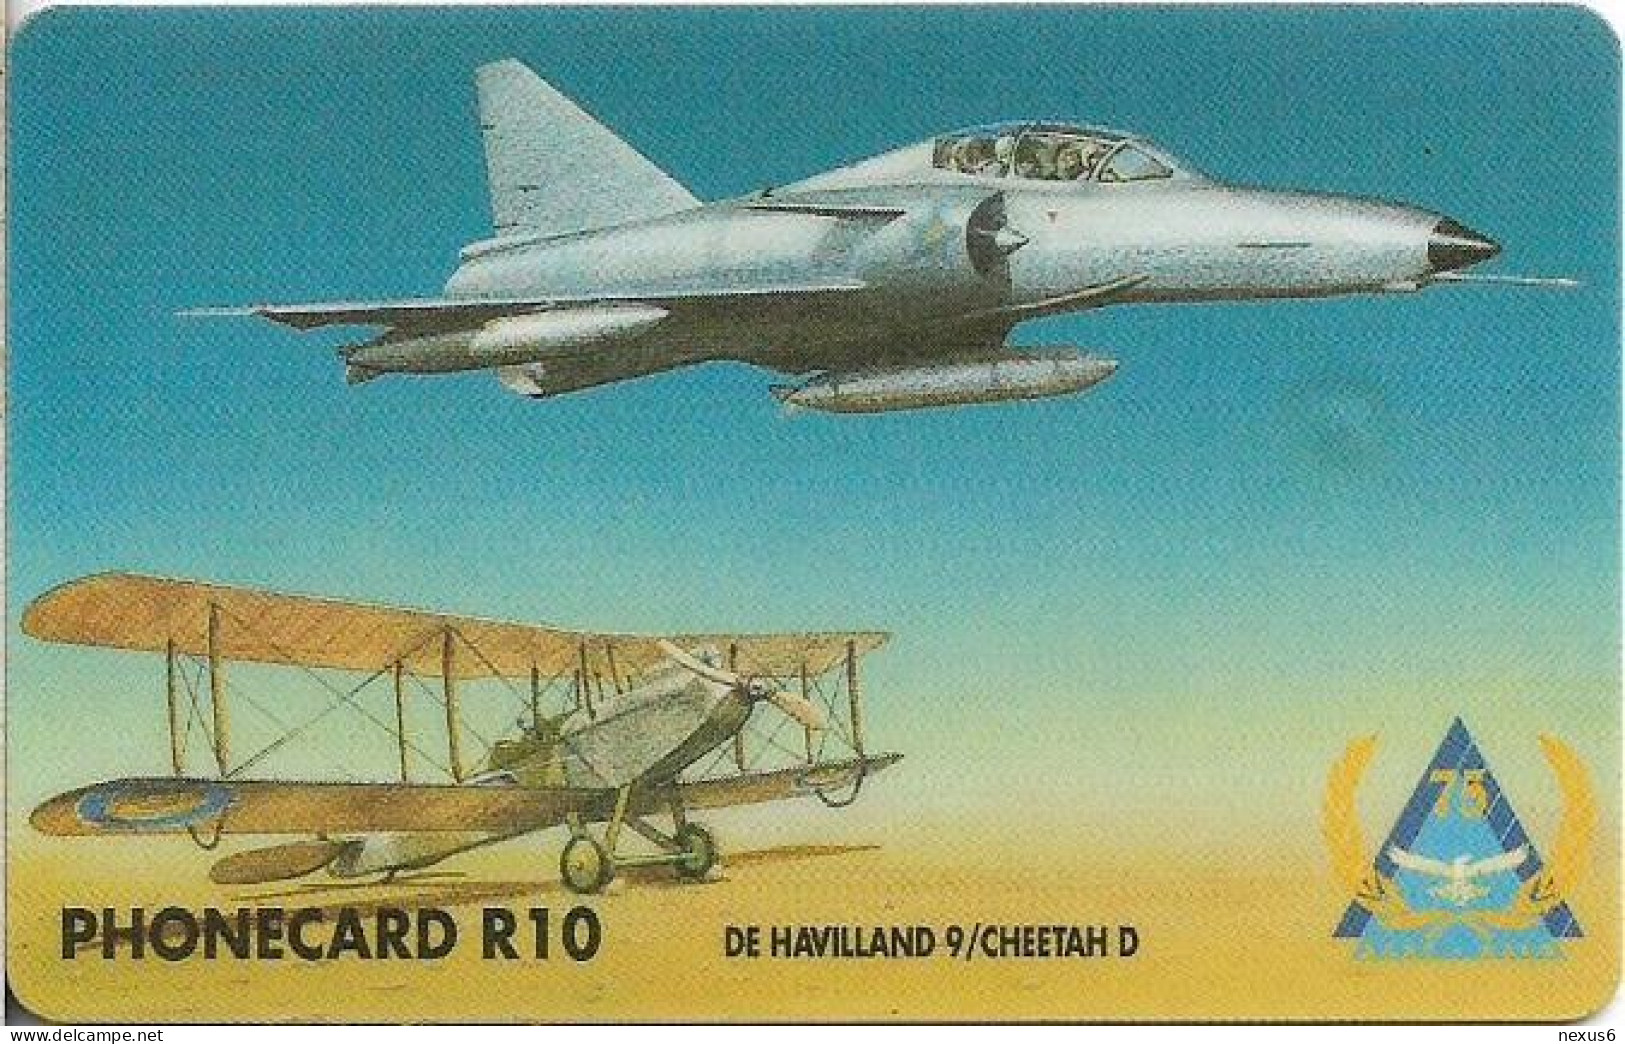 S. Africa - Telkom - De Havilland 9, Air Forces (Cn. Dashed Ø, Thin), Chip Siemens S30, 1995, 10R, Used - Suráfrica